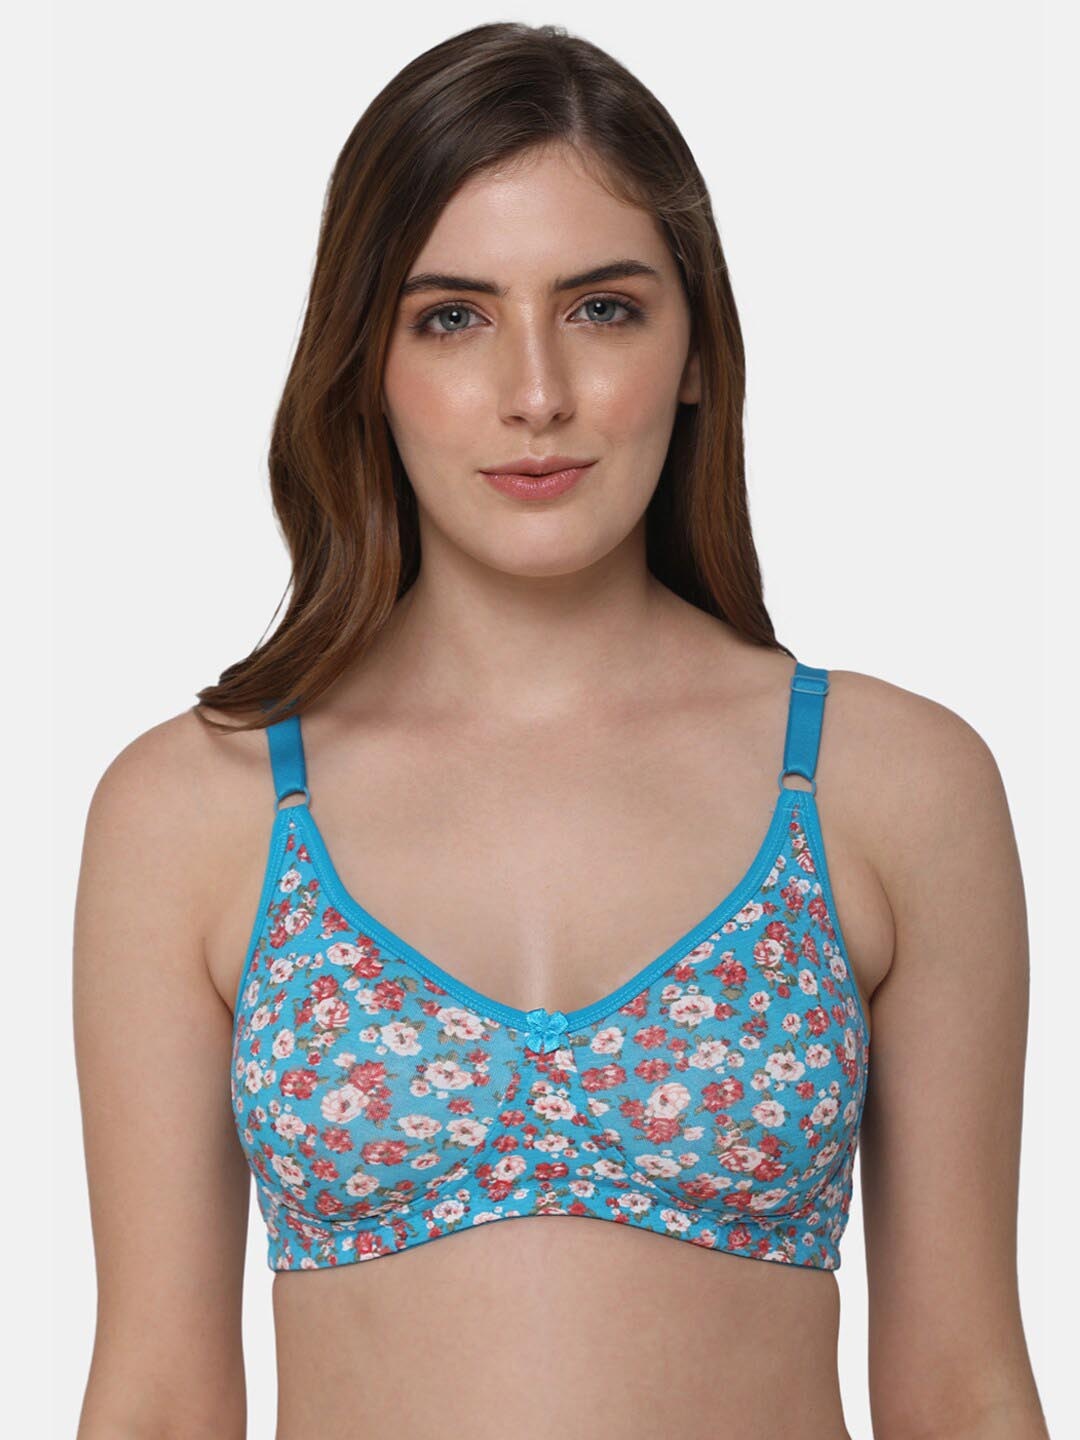 

intimacy LINGERIE Floral Printed Full Coverage Cotton T-shirt Bra With All Day Comfort, Blue